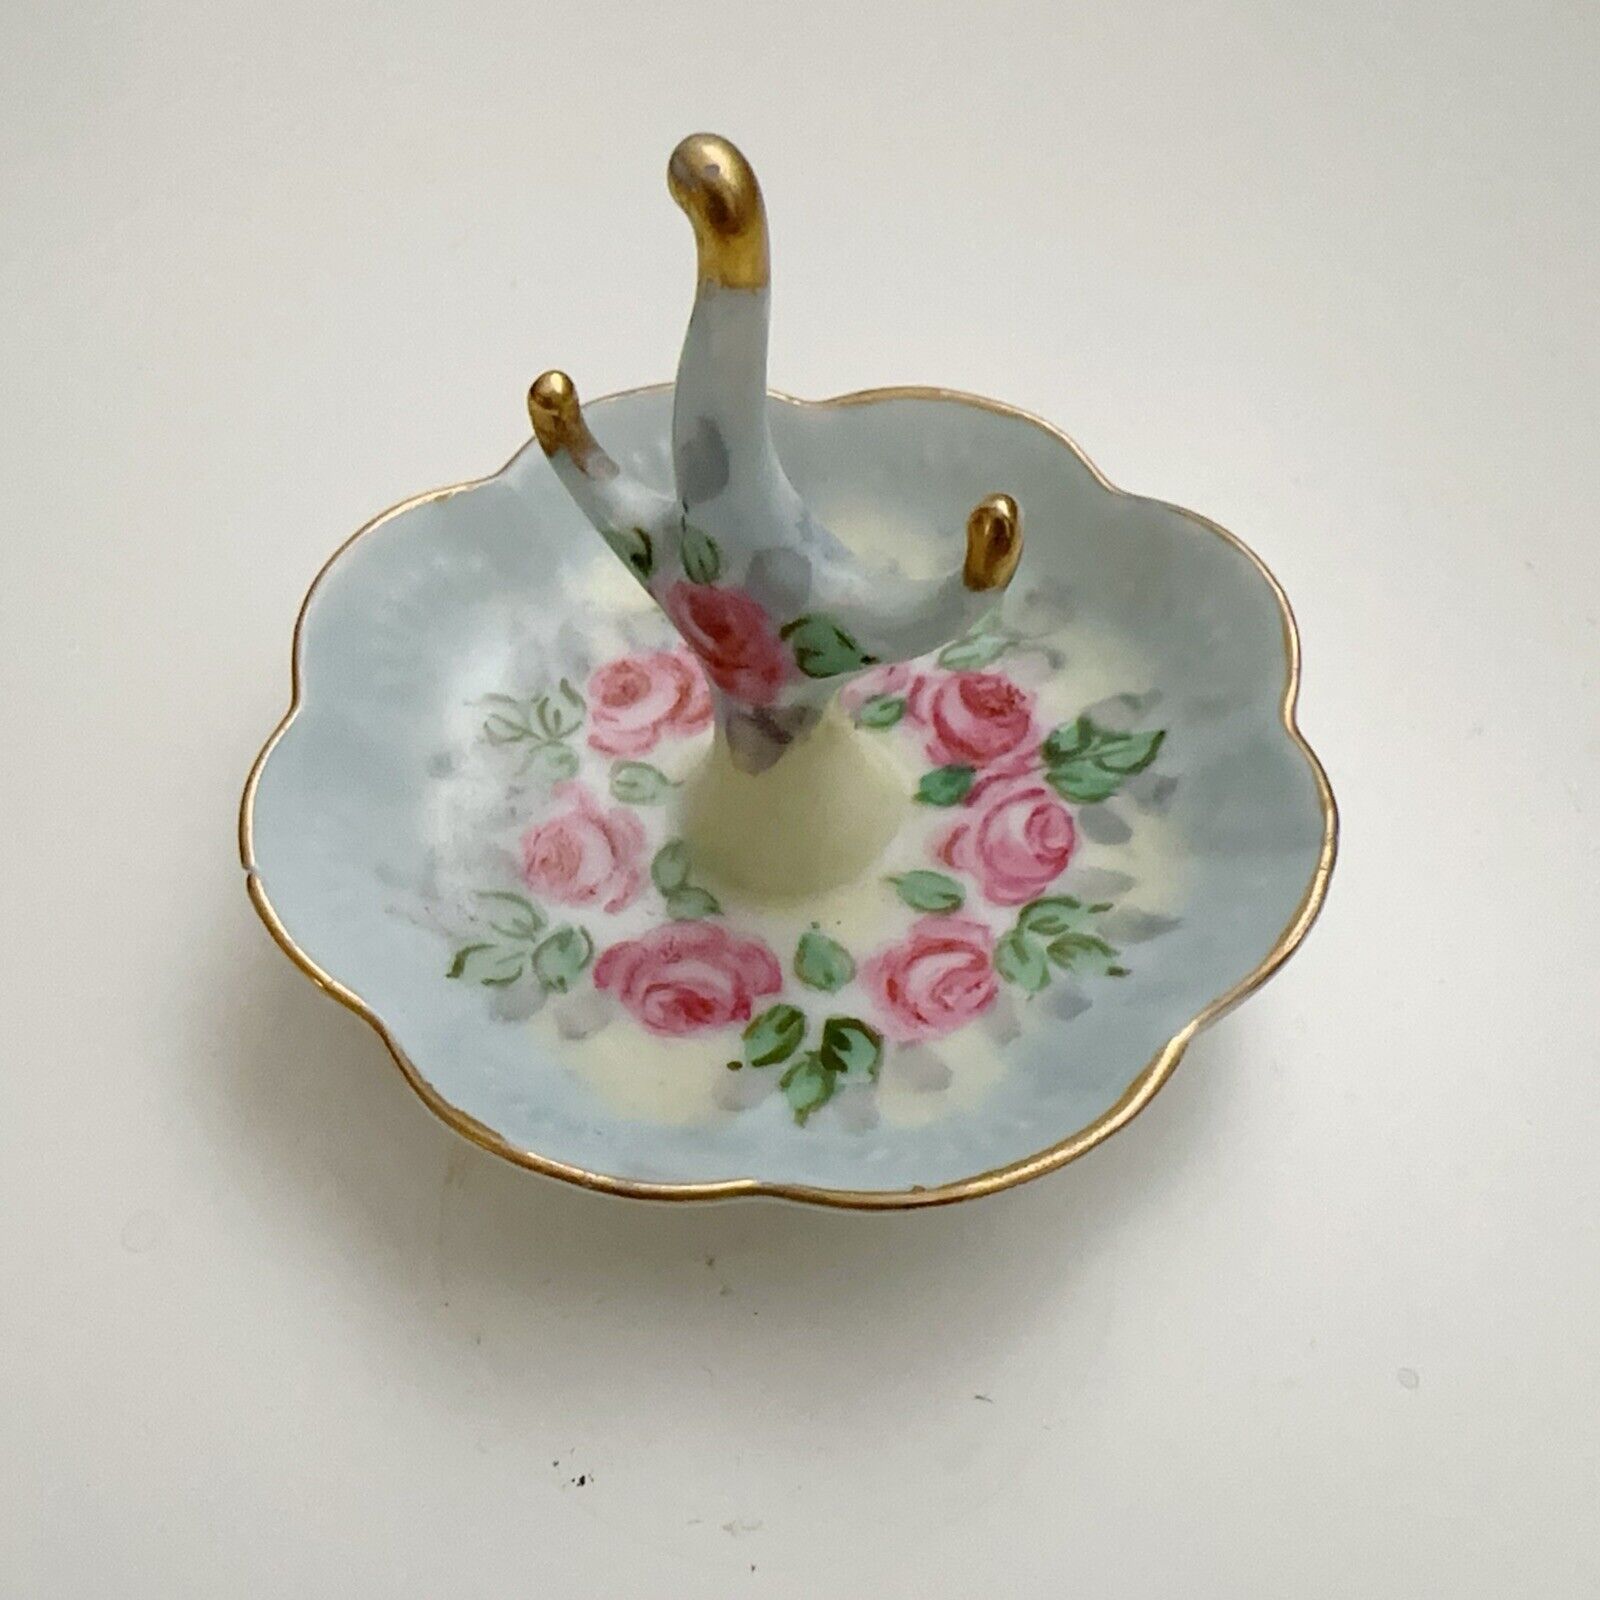 Cute Porcelain Ring Trinket Holder with Painted Roses and Leaves Signed